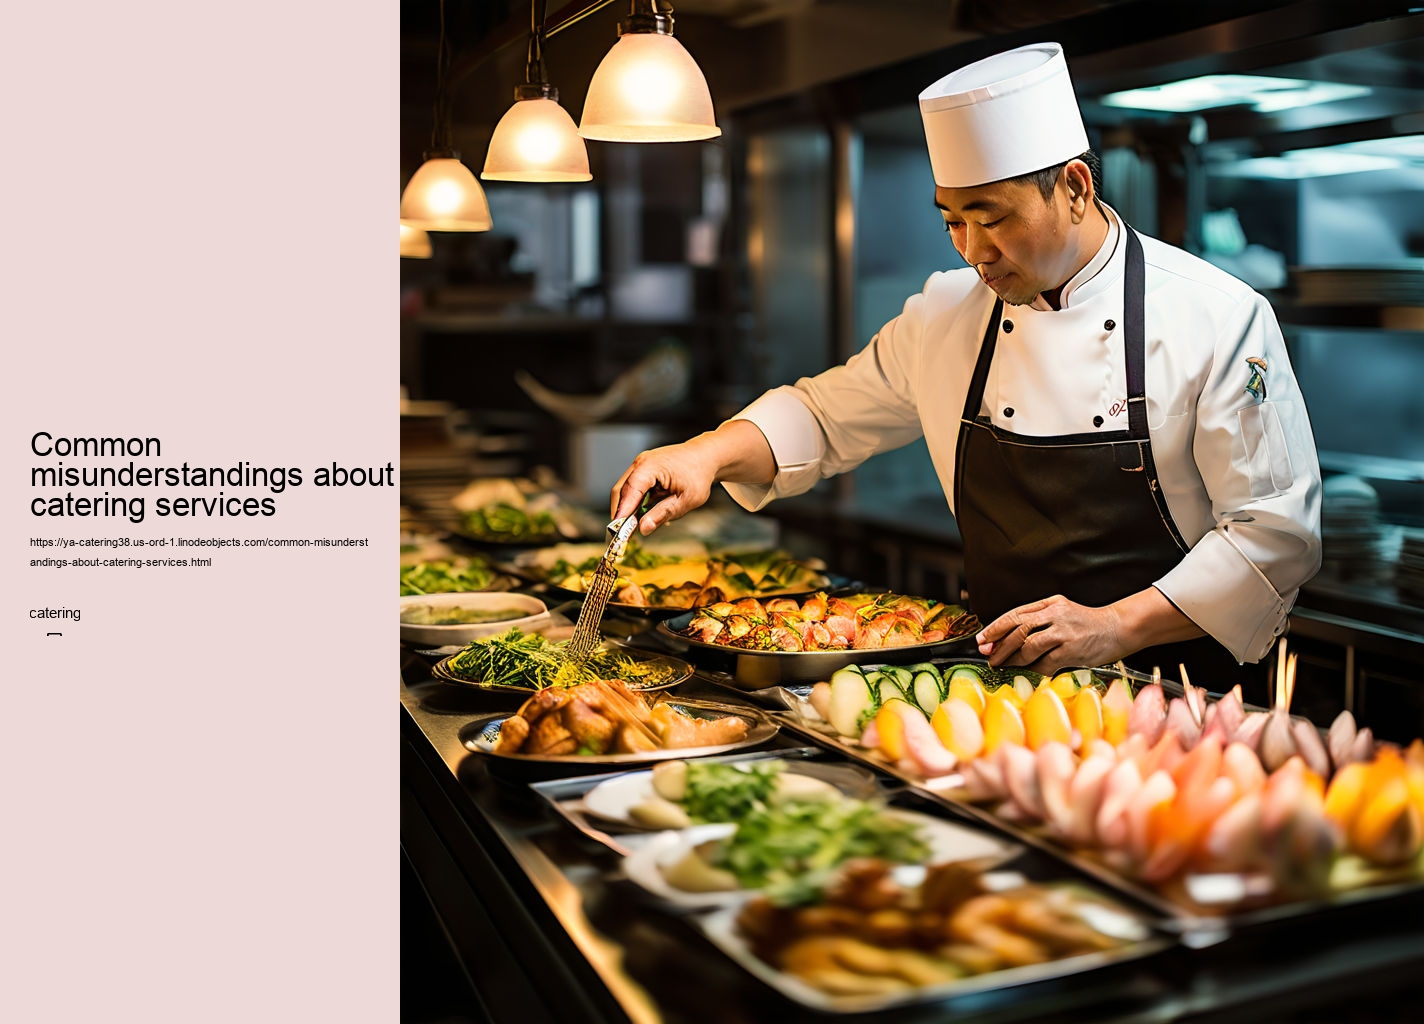 Common misunderstandings about catering services